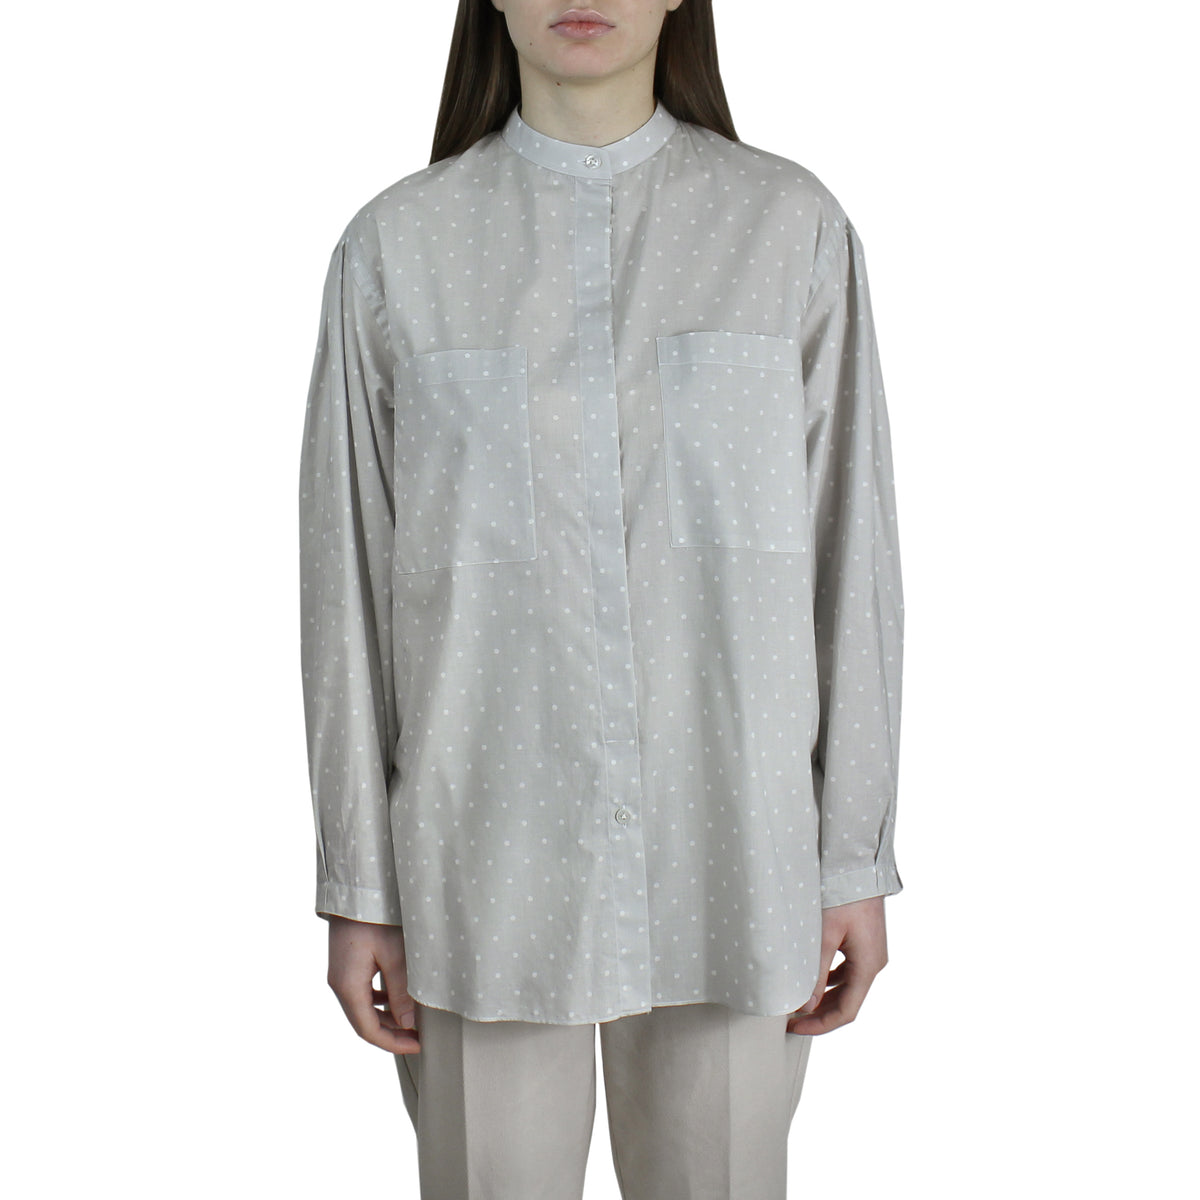 Women's over shirt with front pockets and guru collar